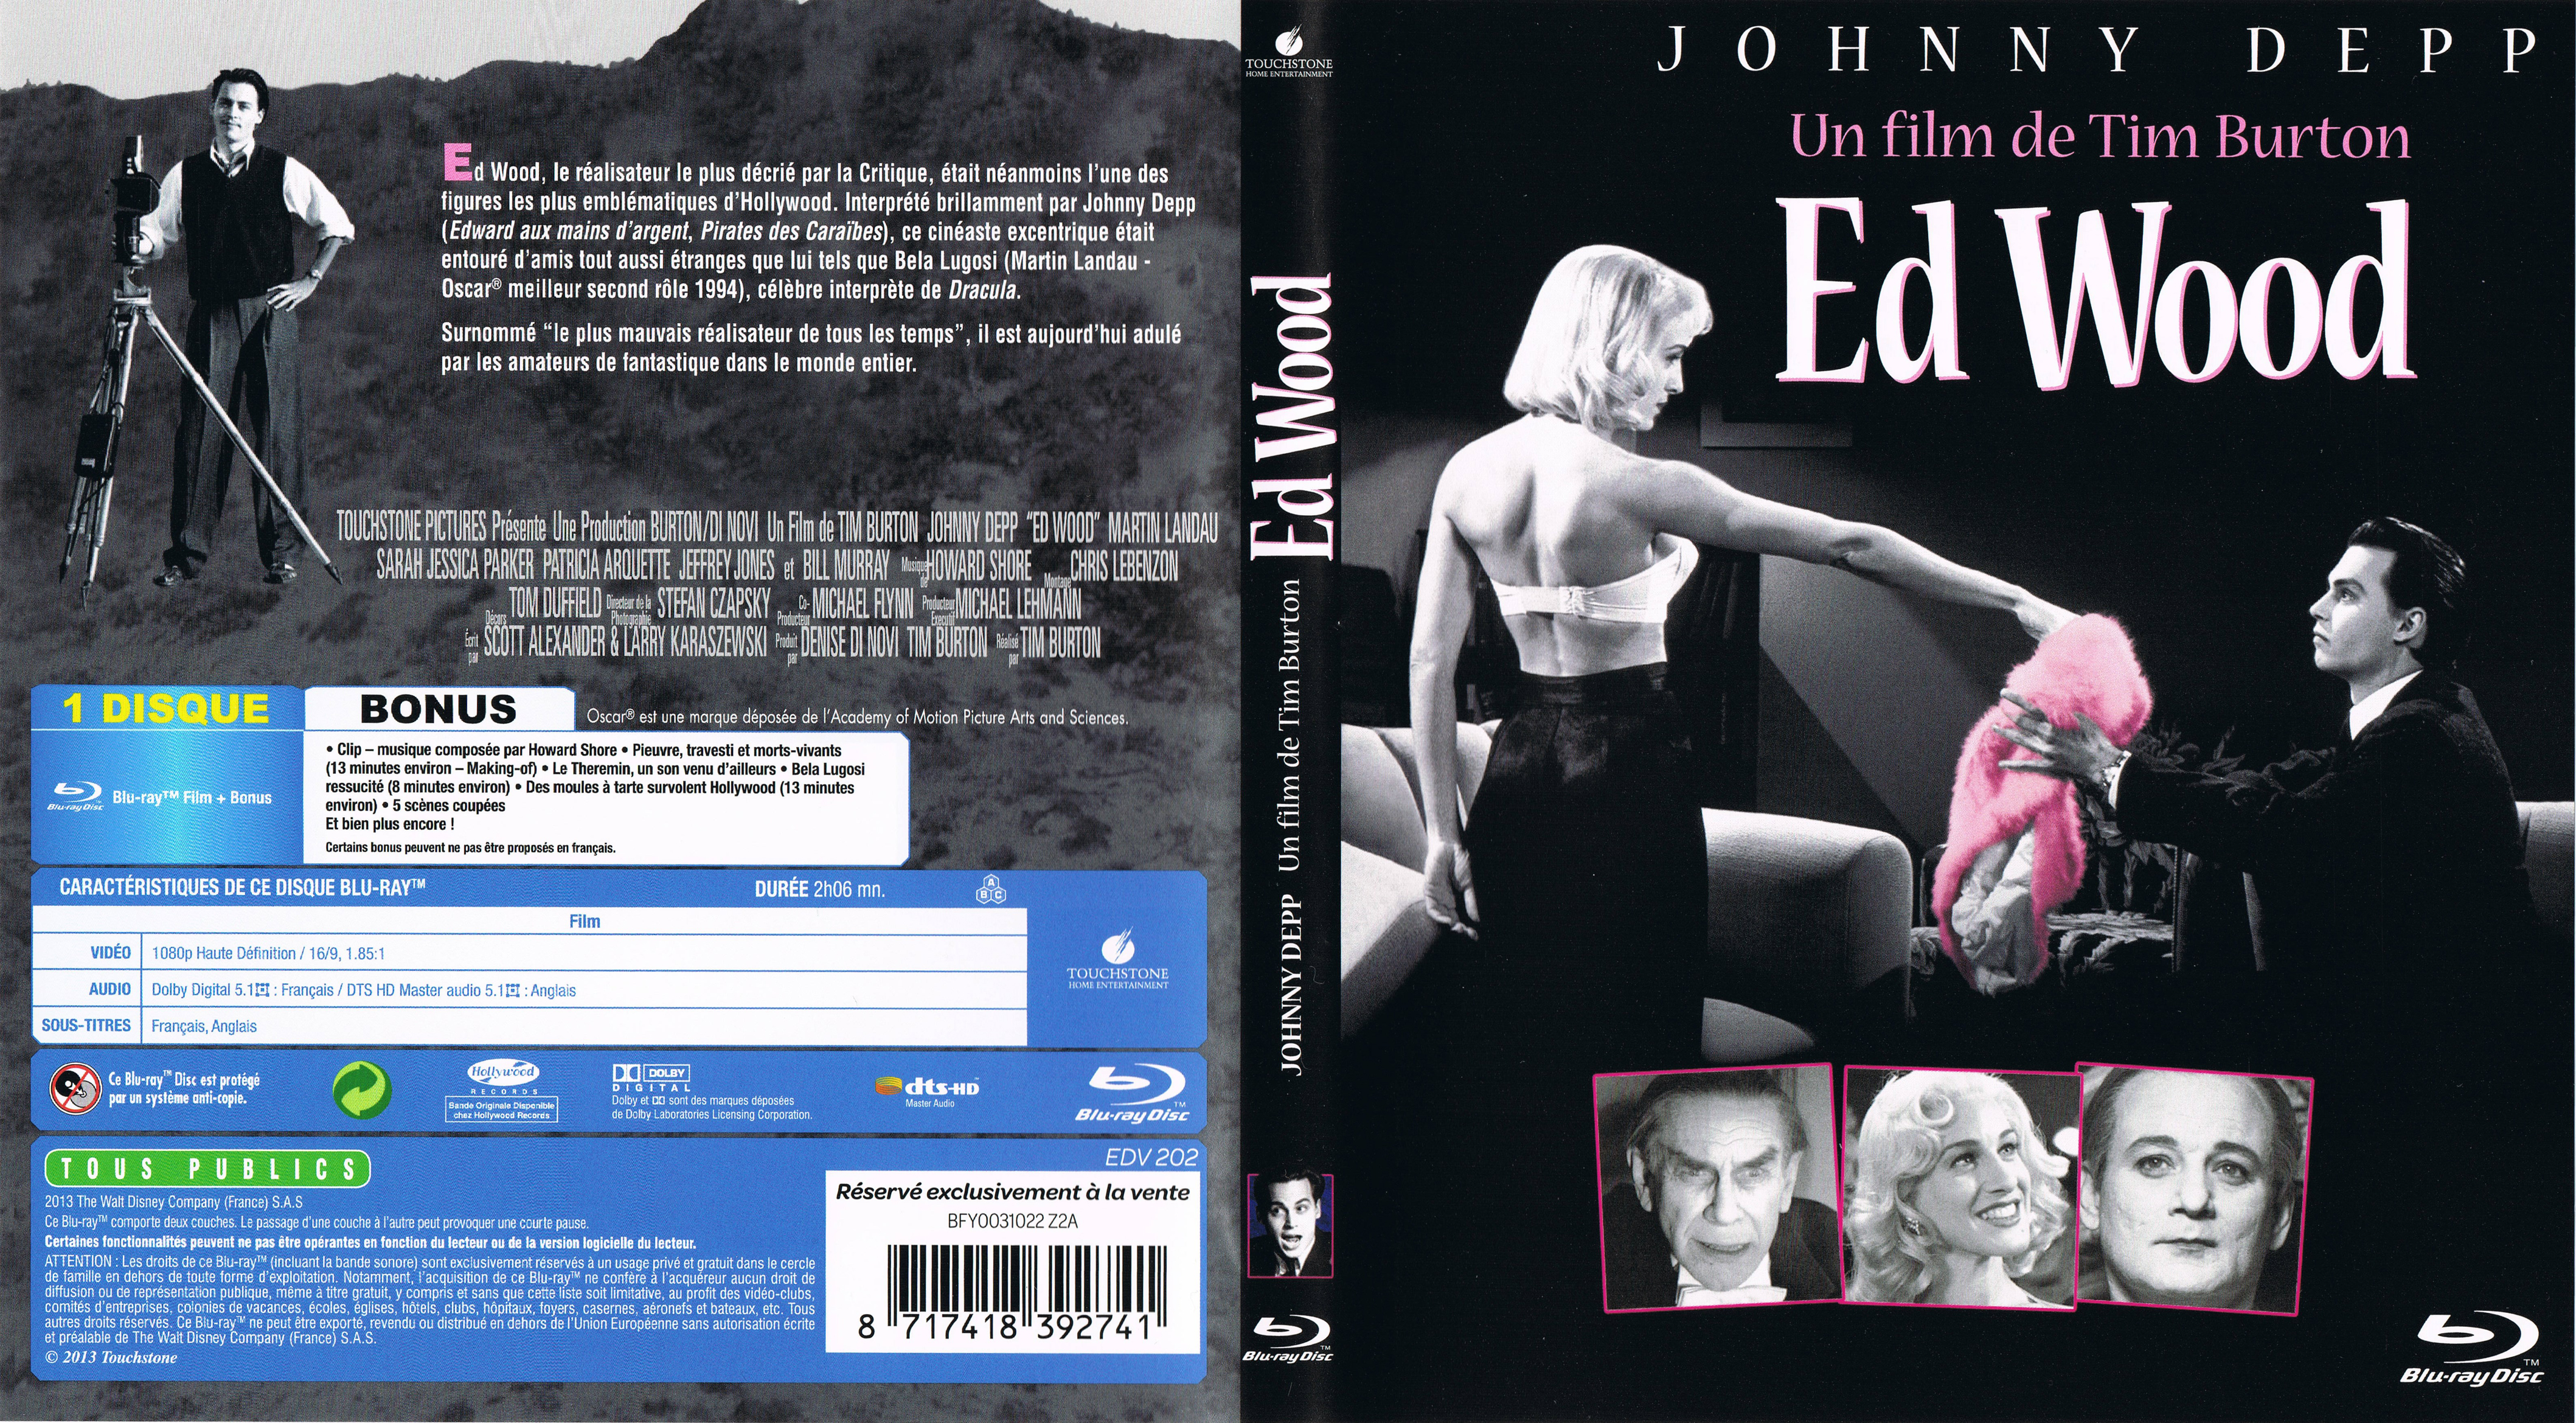 Jaquette DVD Ed Wood (BLU-RAY)